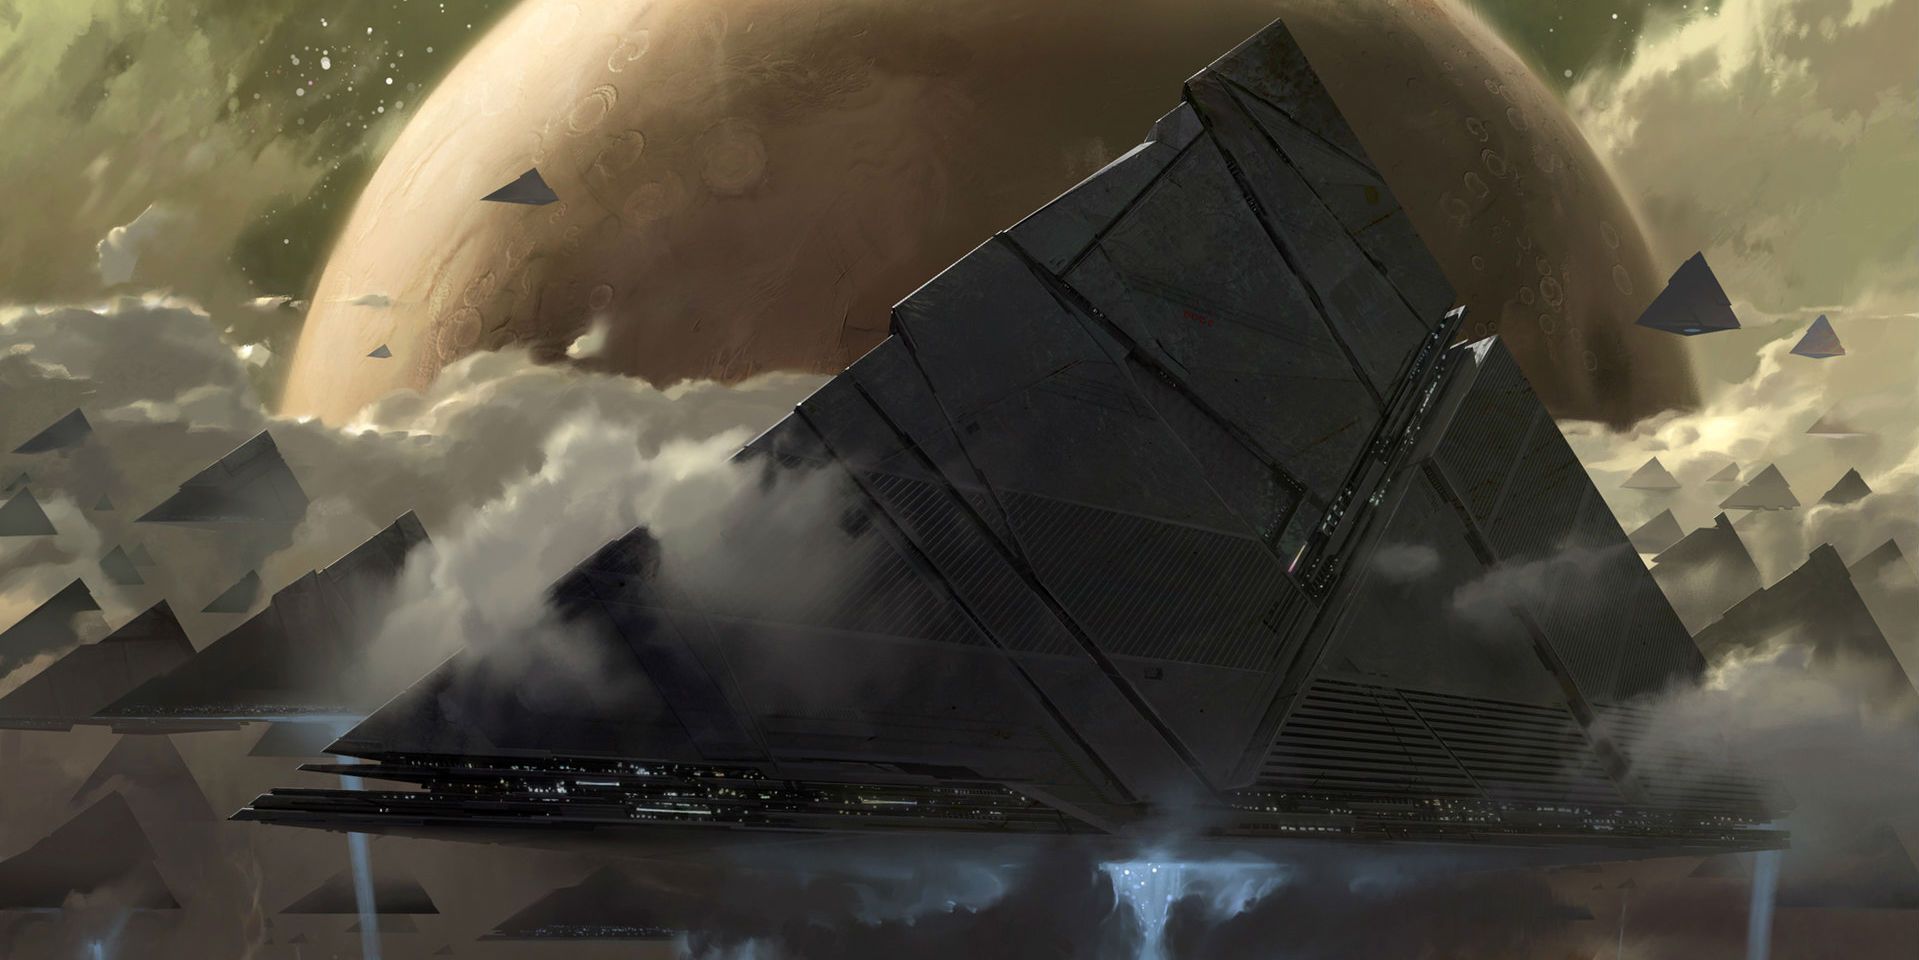 destiny 2 ending pyramid ships the darkness